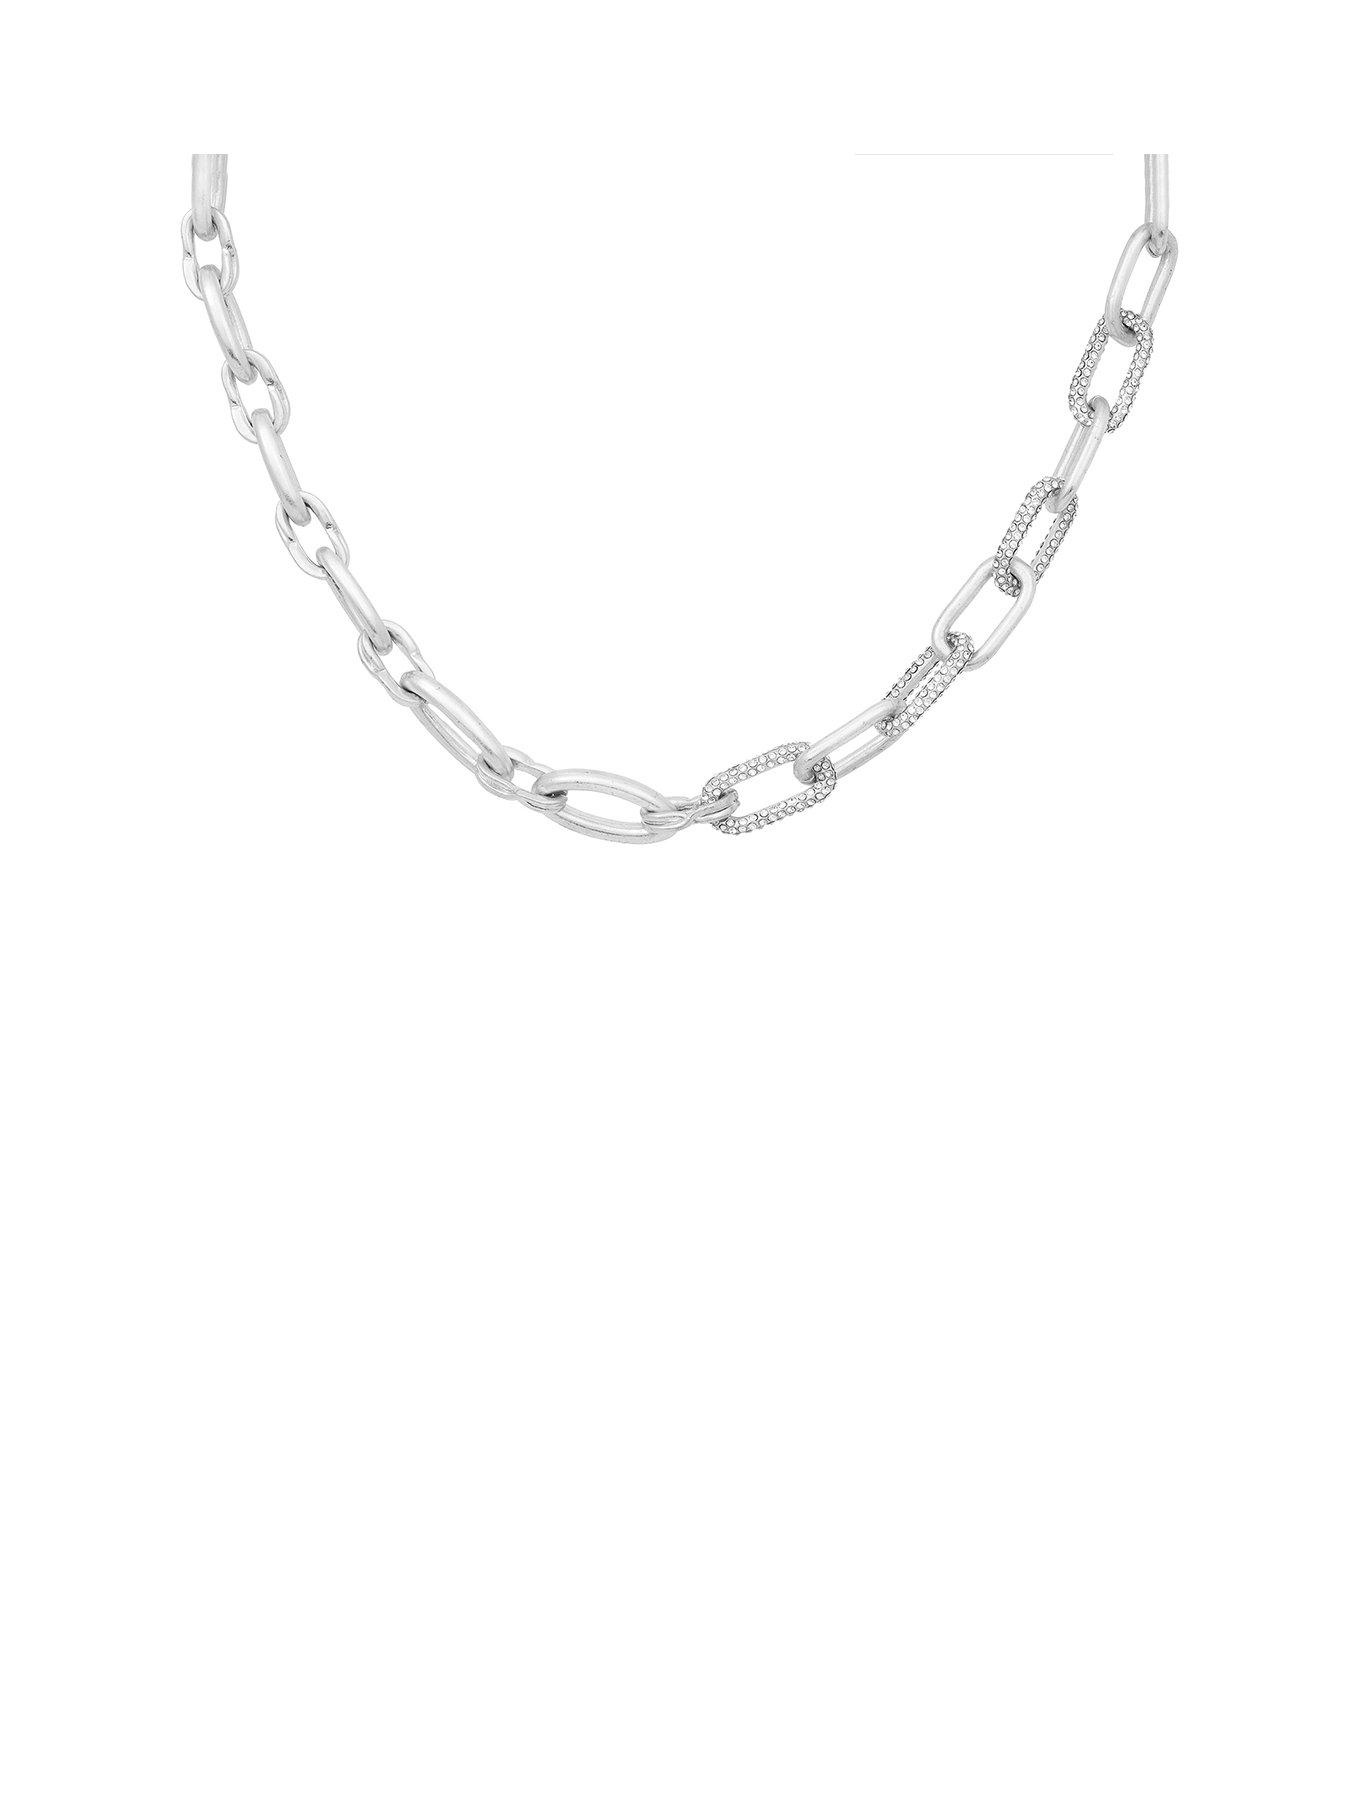  Silver Chunky Link Chain Necklace